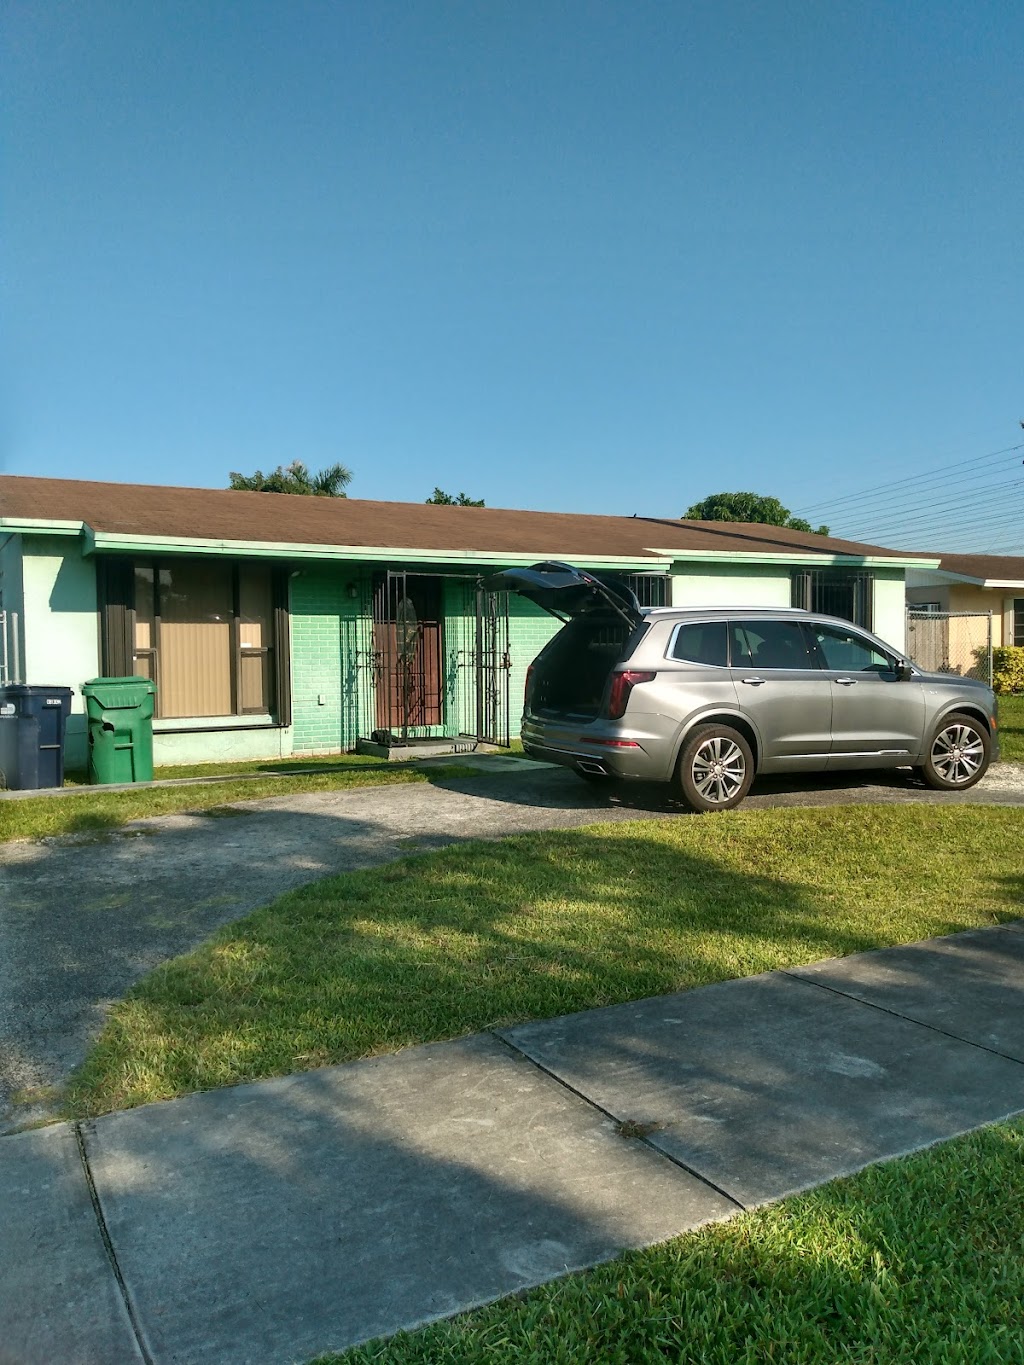 Kevin Broils Park | 26150 SW 125th Ave, Quail Heights, FL 33177 | Phone: (305) 247-1553